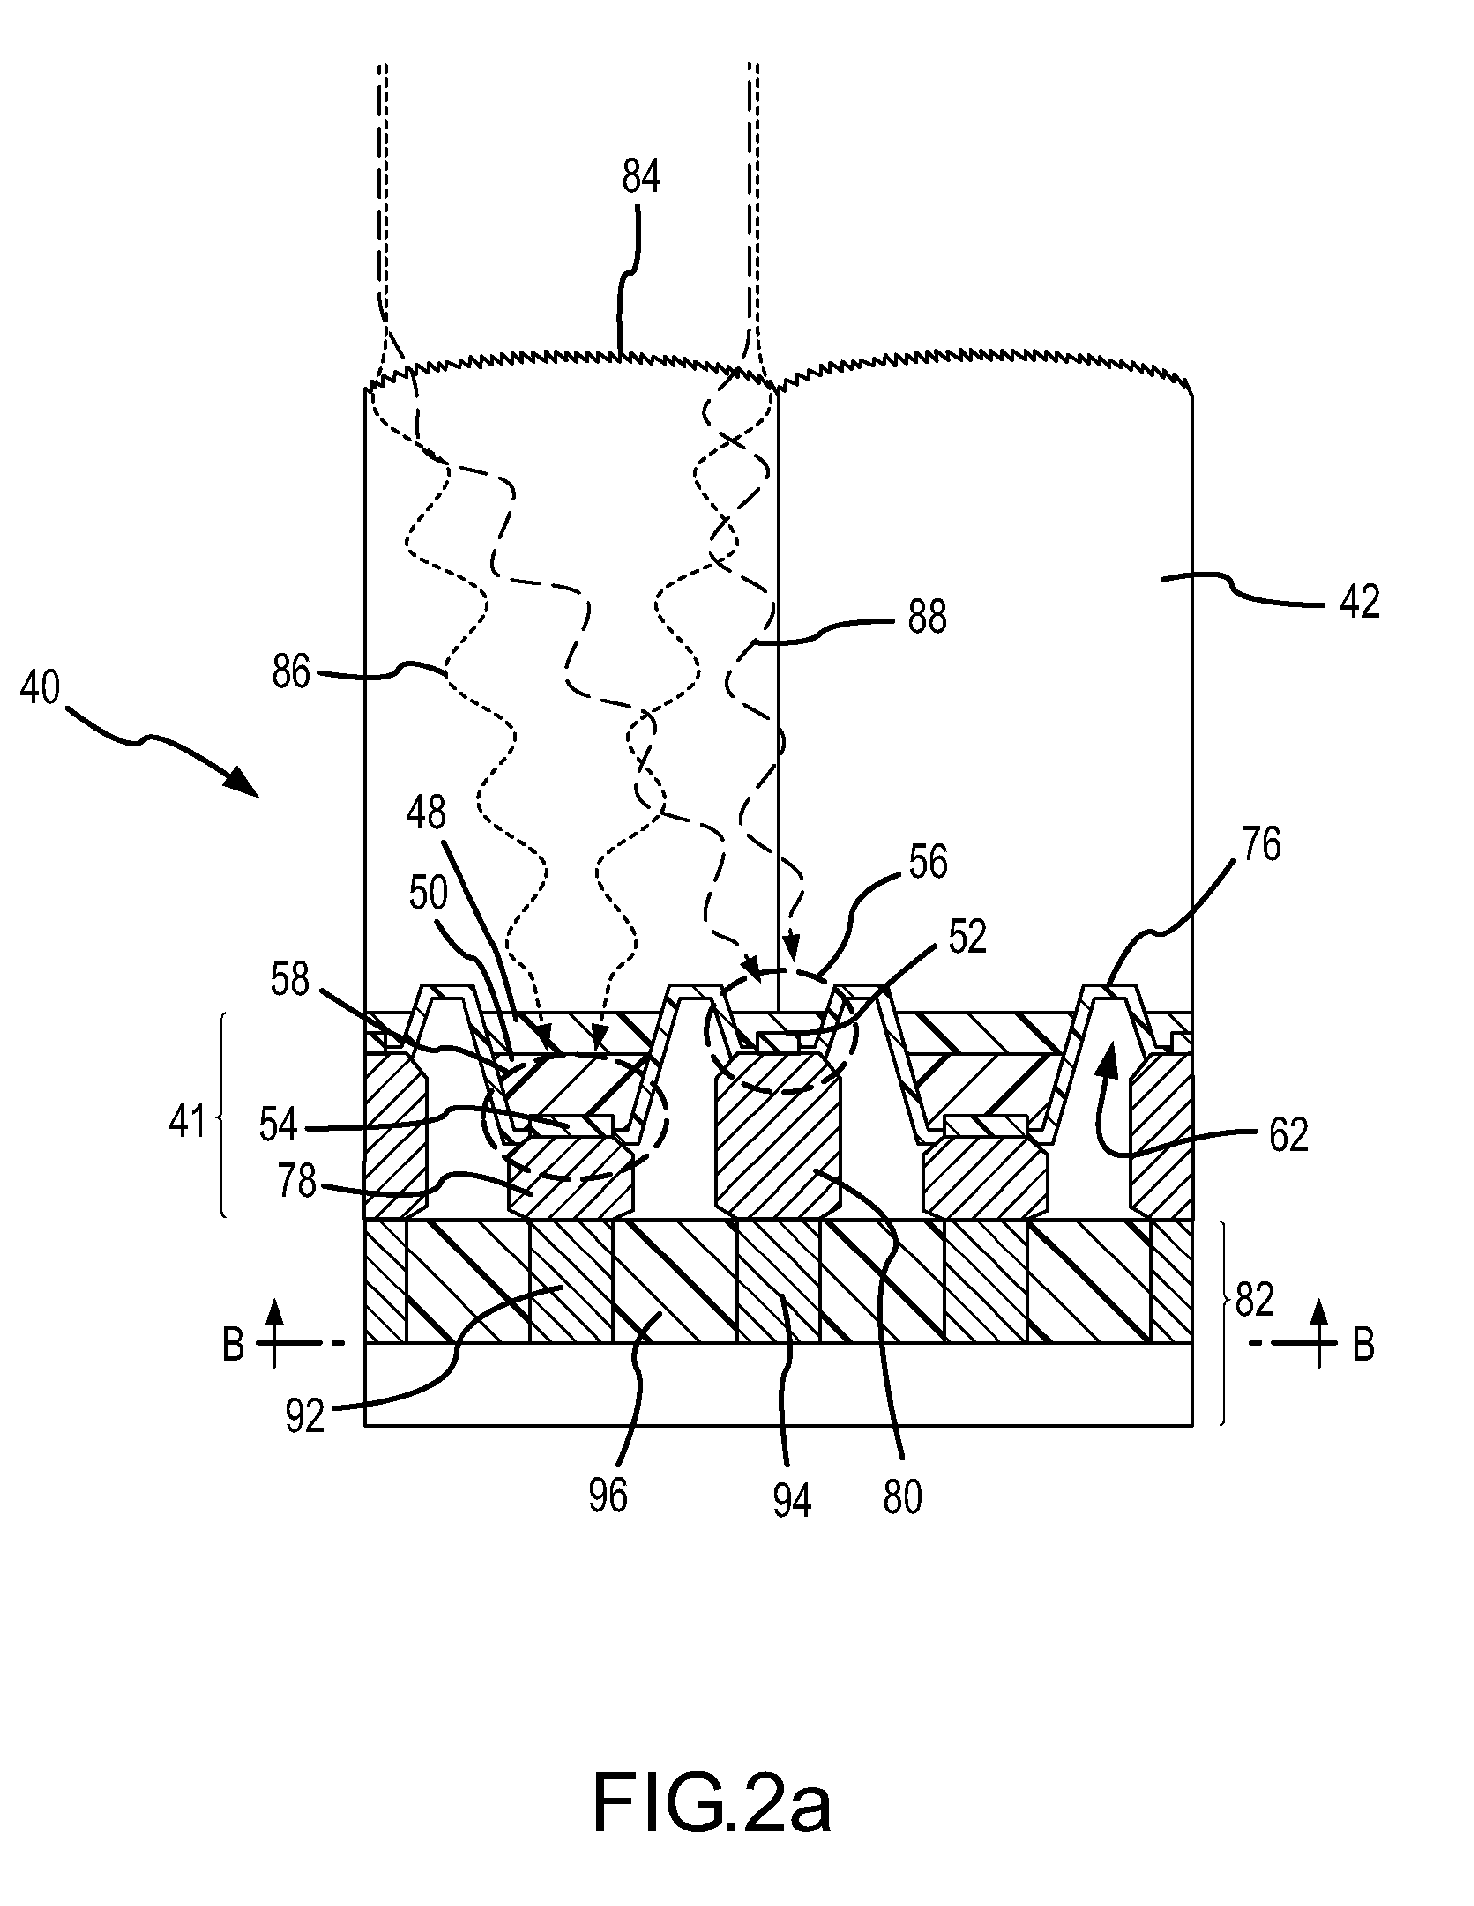 Multimode focal plane array with electrically isolated commons for independent sub-array biasing